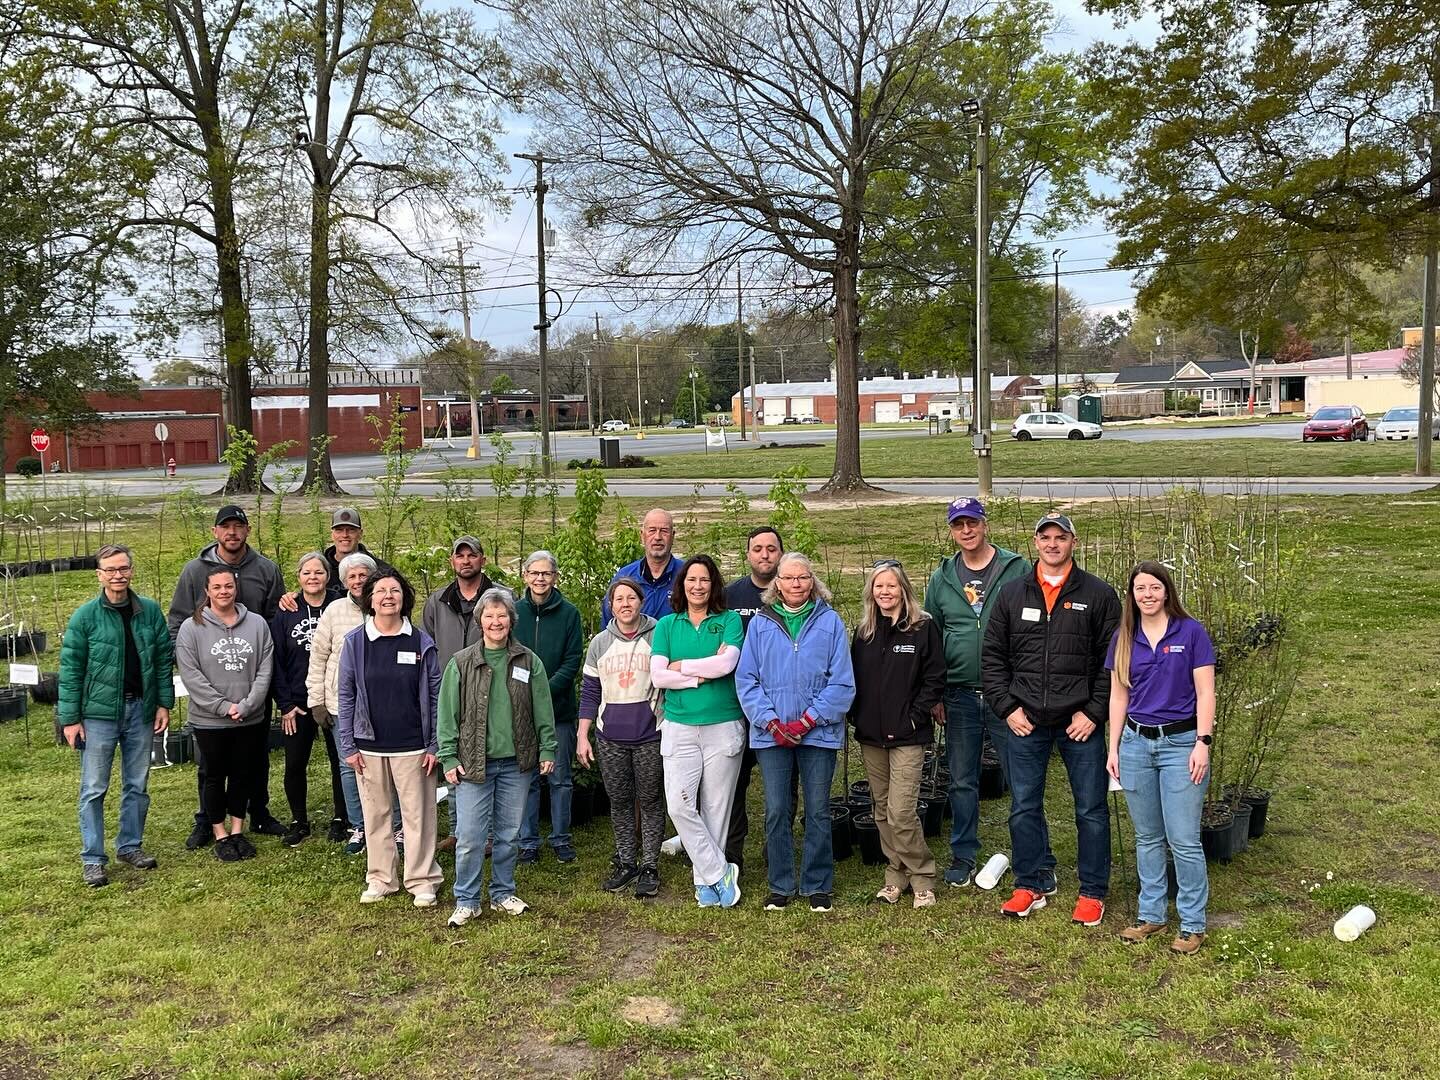 Shout out to all the volunteers who came out on Easter Saturday to help with the #BradfordPearBounty. Over 225 free native trees given away. #ClintonCanopy #Clemson #SCFC #CityOfClintonSC